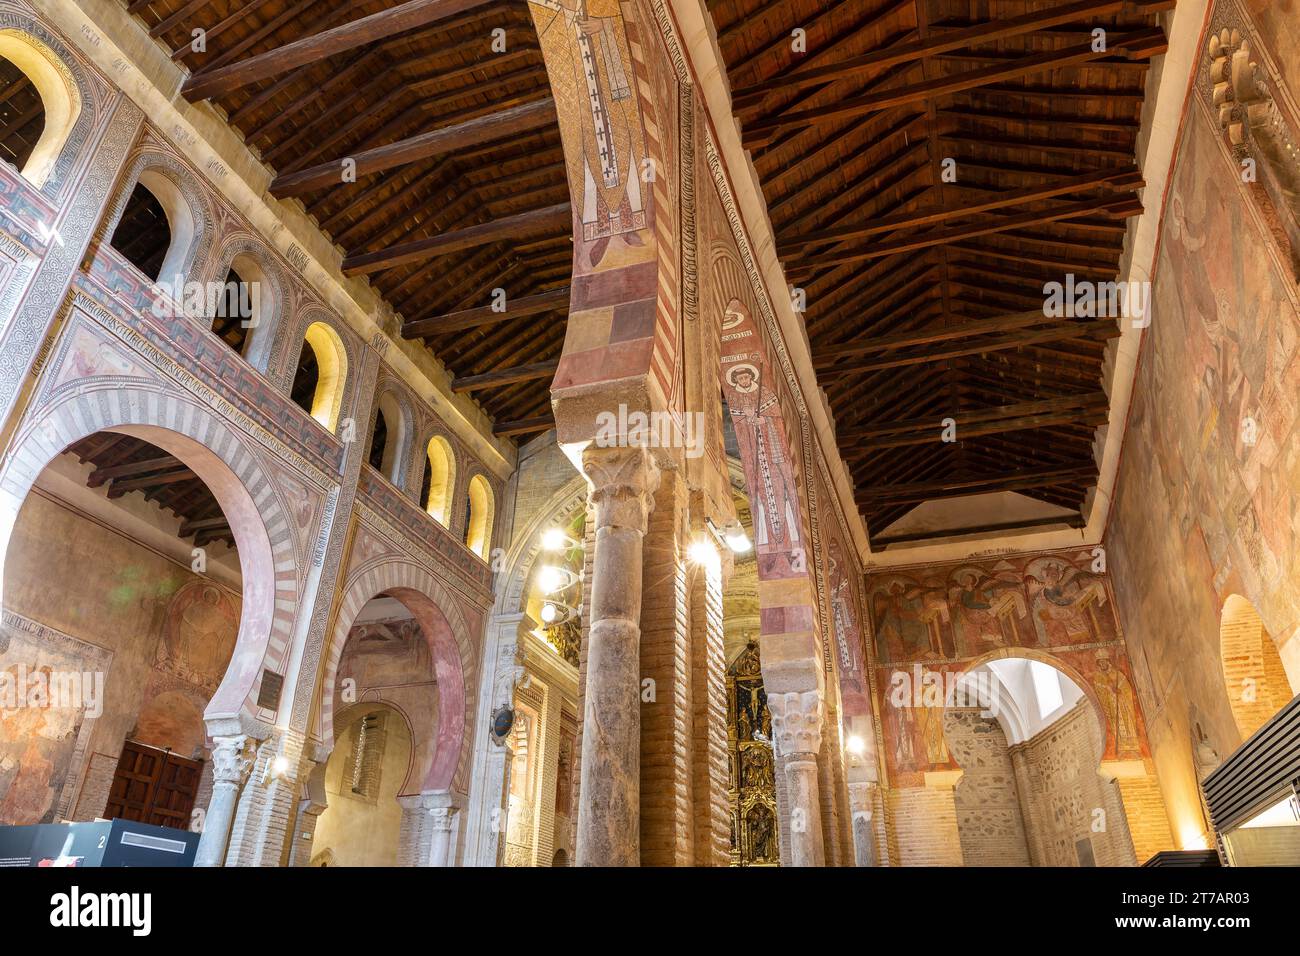 Toledo, Spain, 08.10.21. Church of San Roman (Museum of the Councils and Visigoth Culture) inside view with Romanesque colorful frescos. Stock Photo